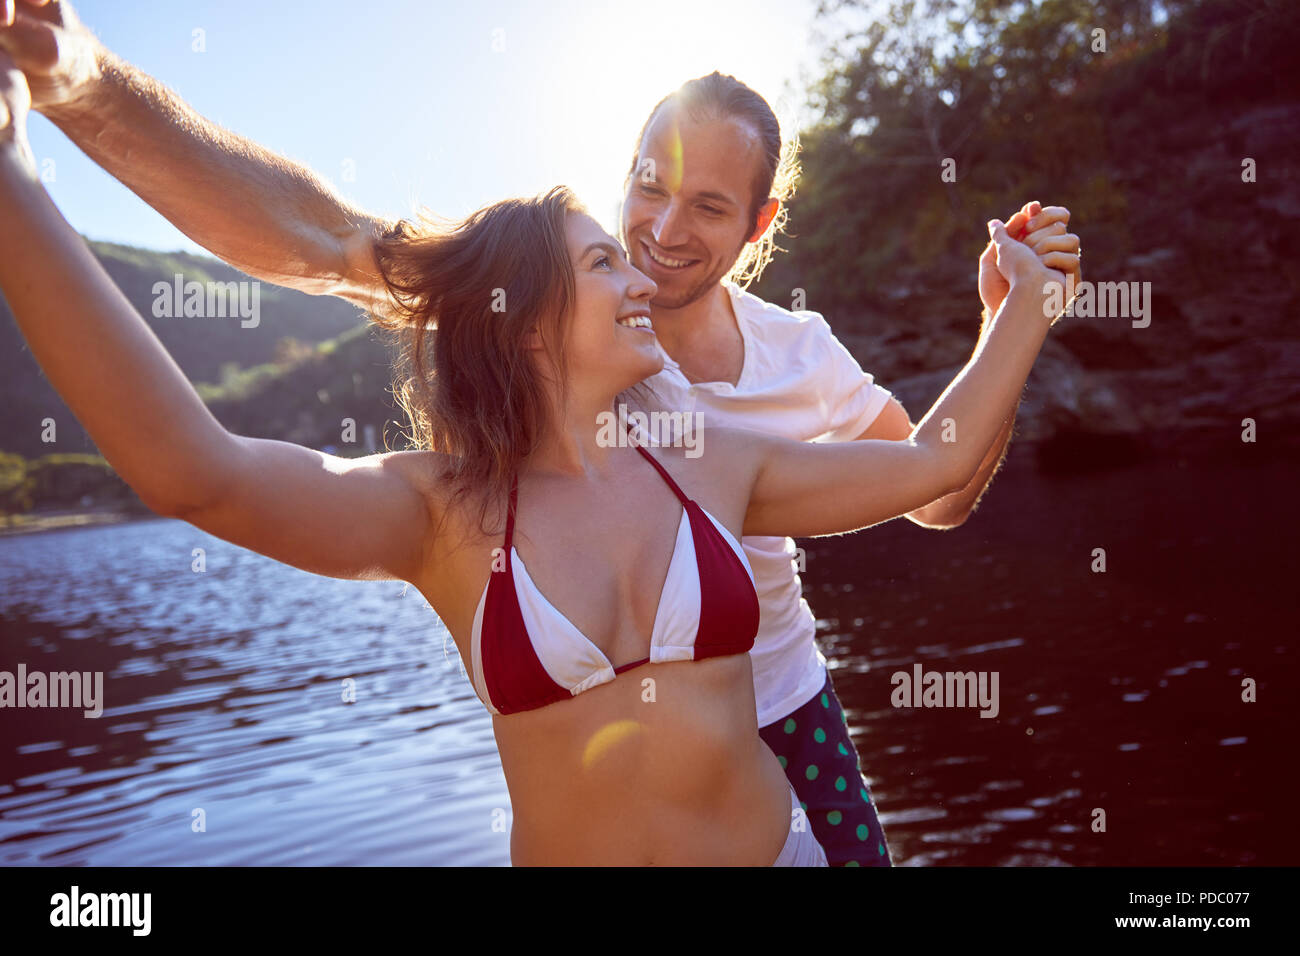 Happy, carefree couple holding hands at sunny summer lake Stock Photo